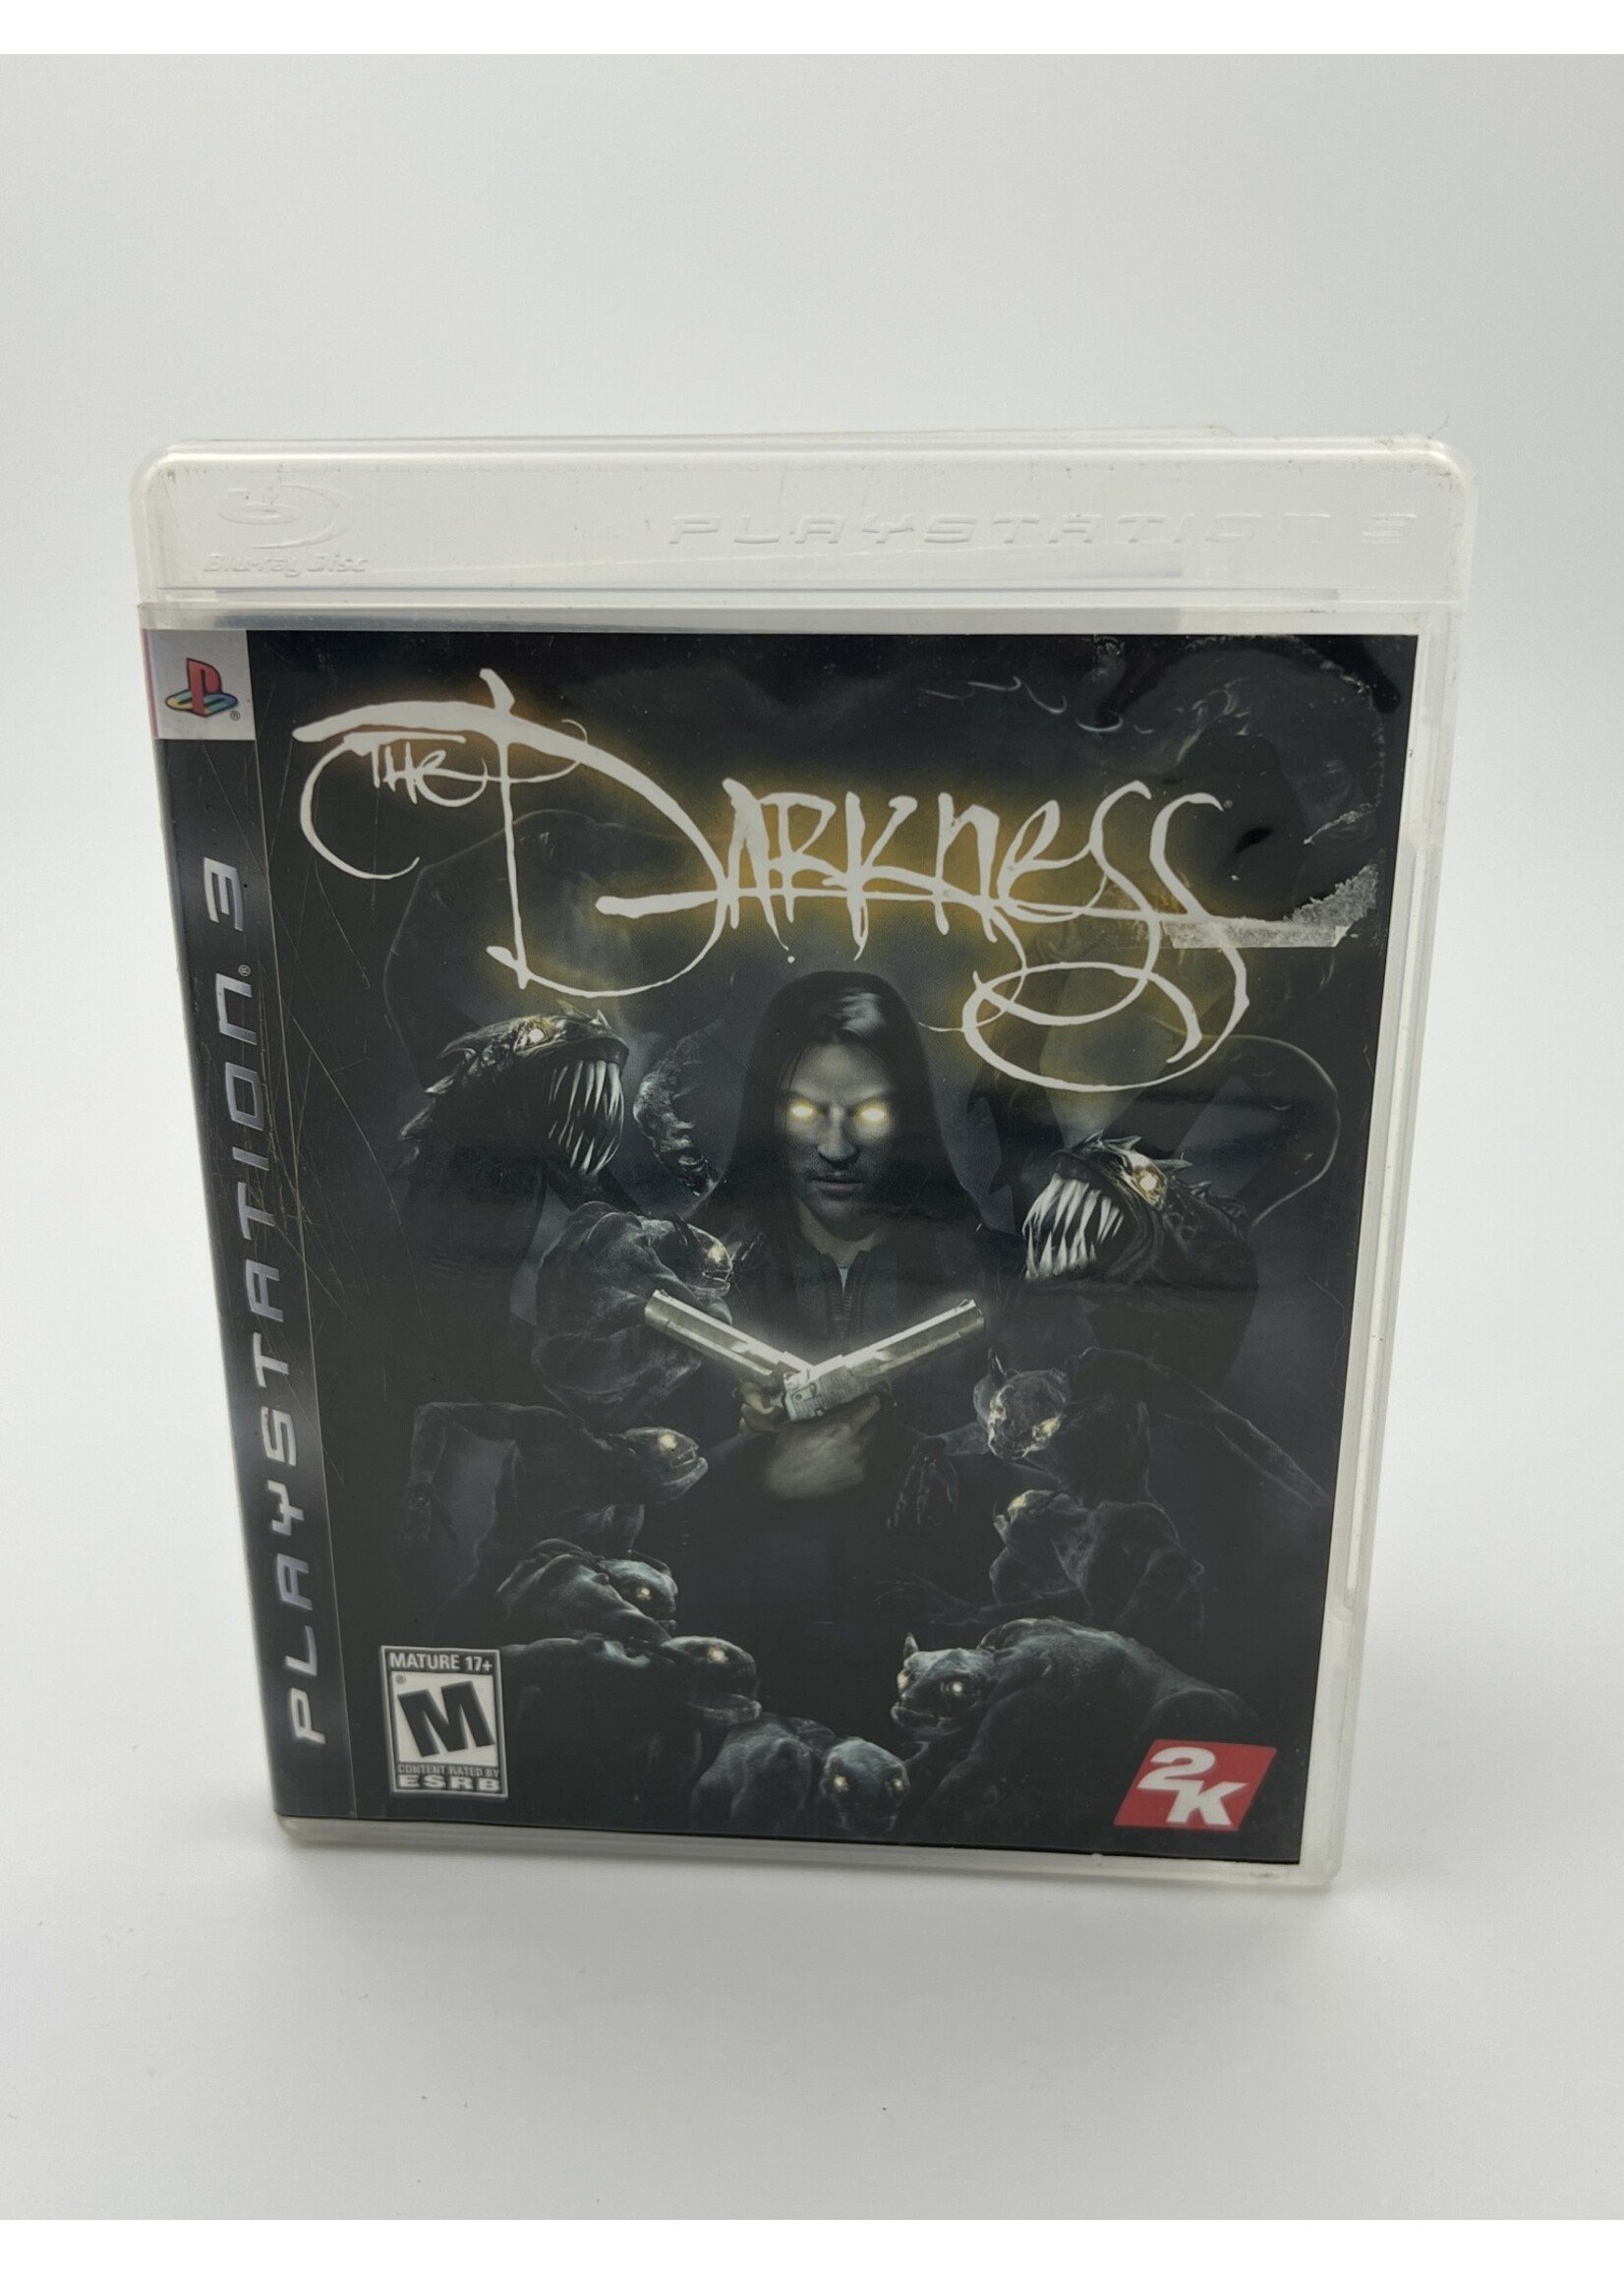 Sony   The Darkness PS3